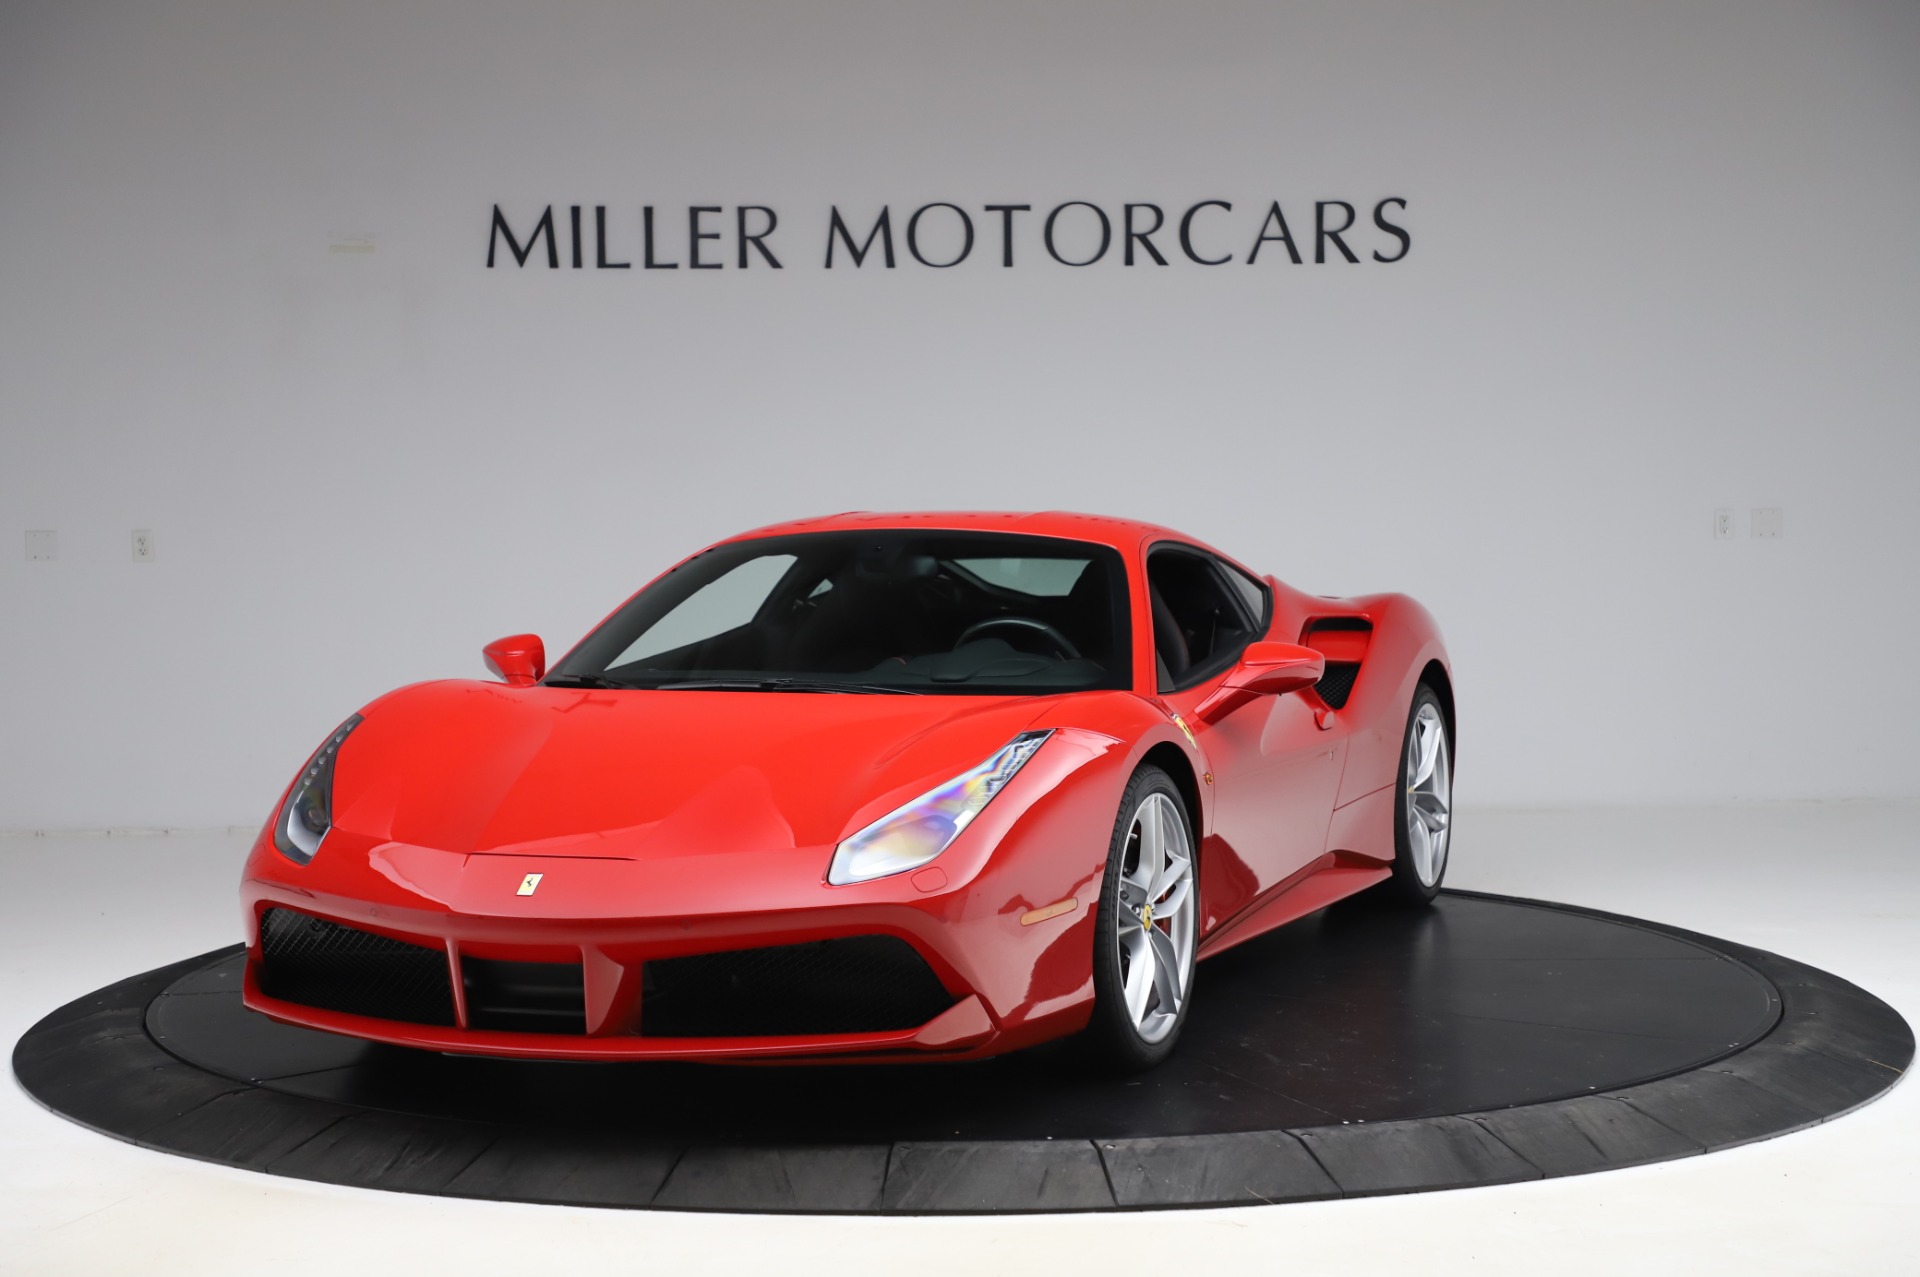 Used 2017 Ferrari 488 GTB for sale Sold at Bentley Greenwich in Greenwich CT 06830 1